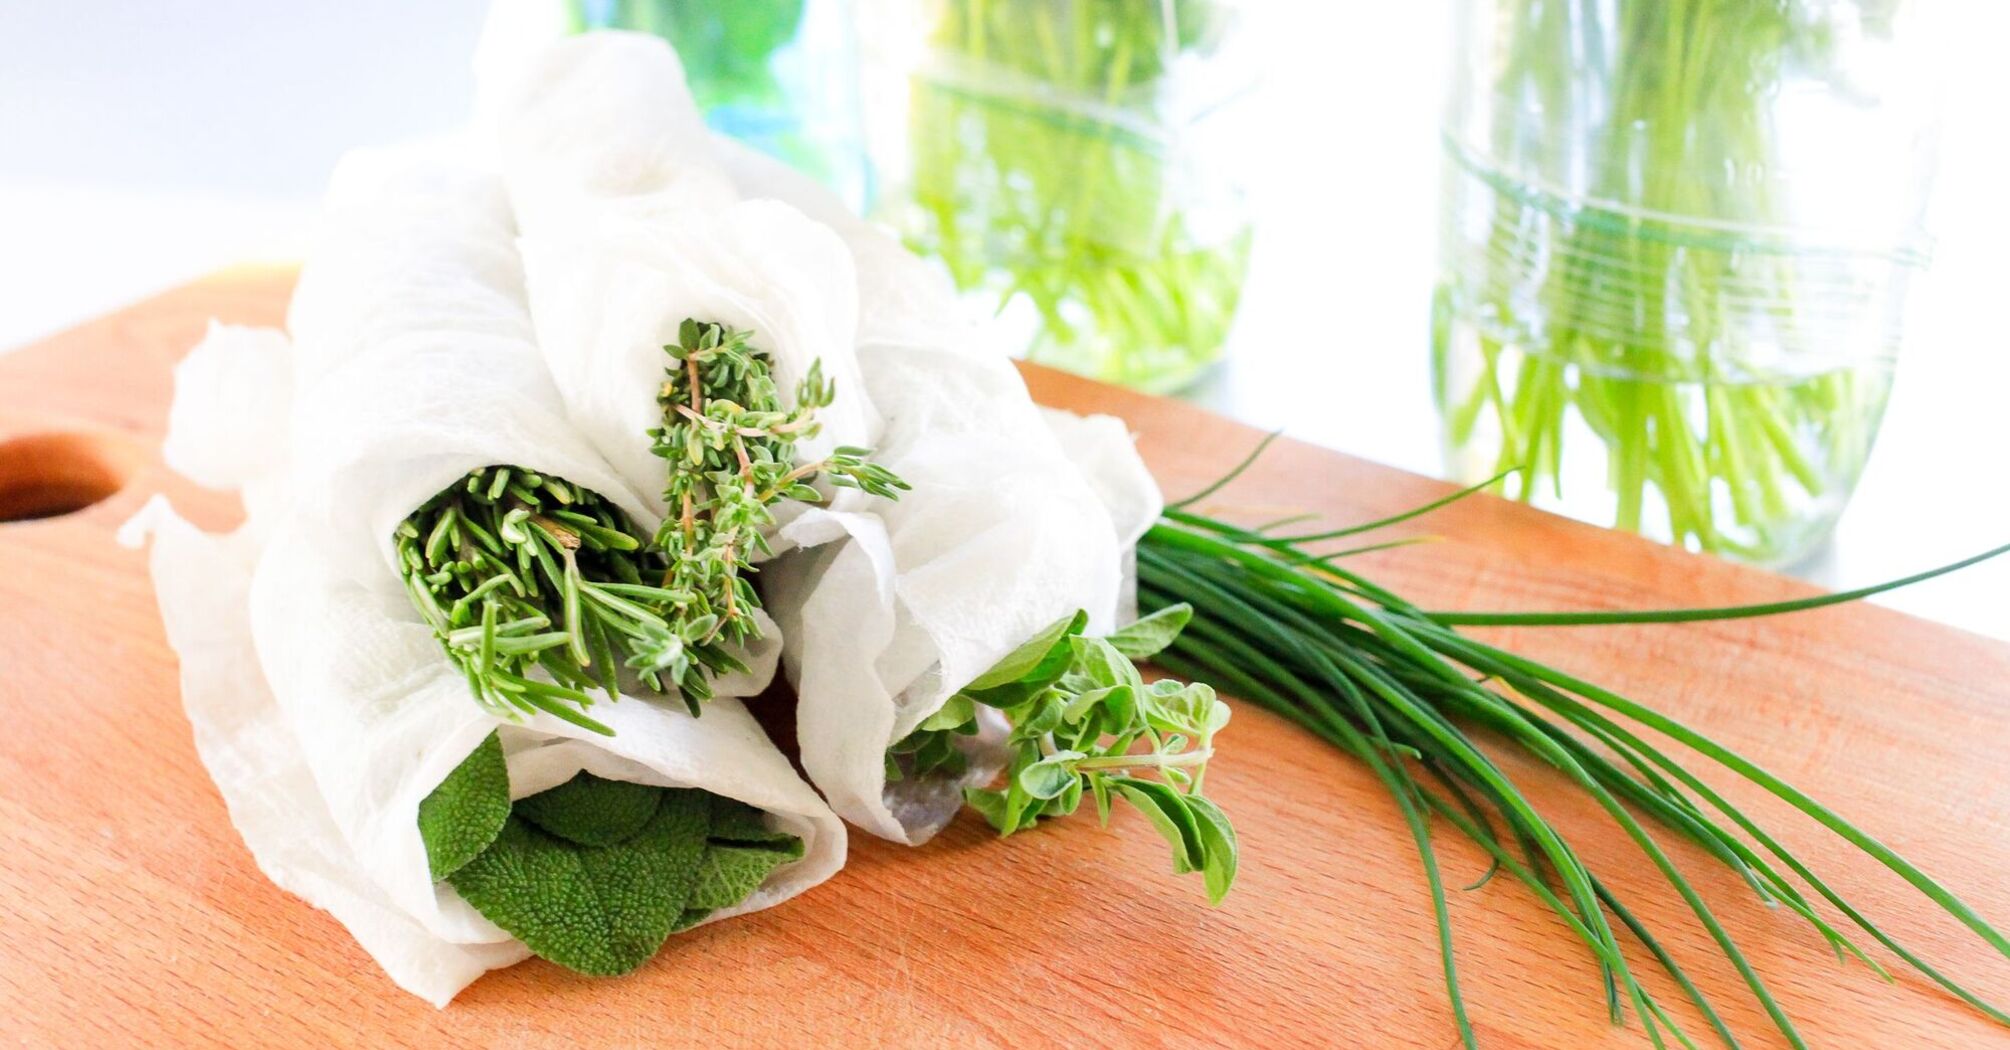 How to store herbs to keep them fresh